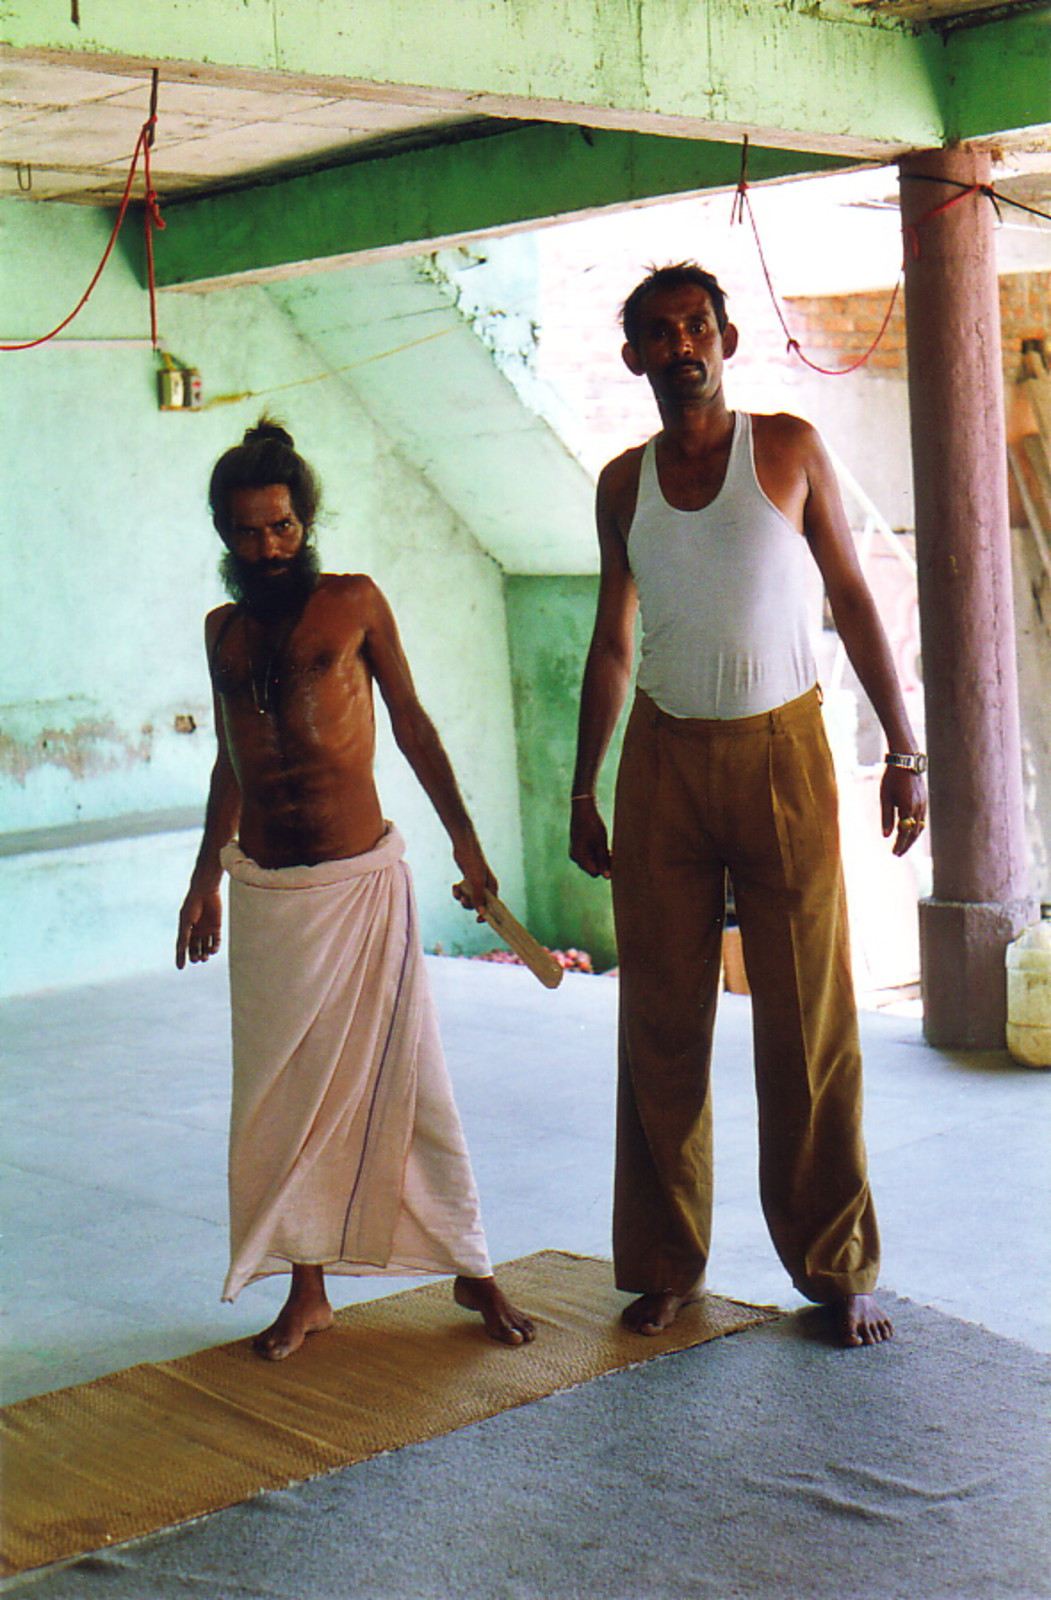 The head of the ashram (left) and his right-hand man